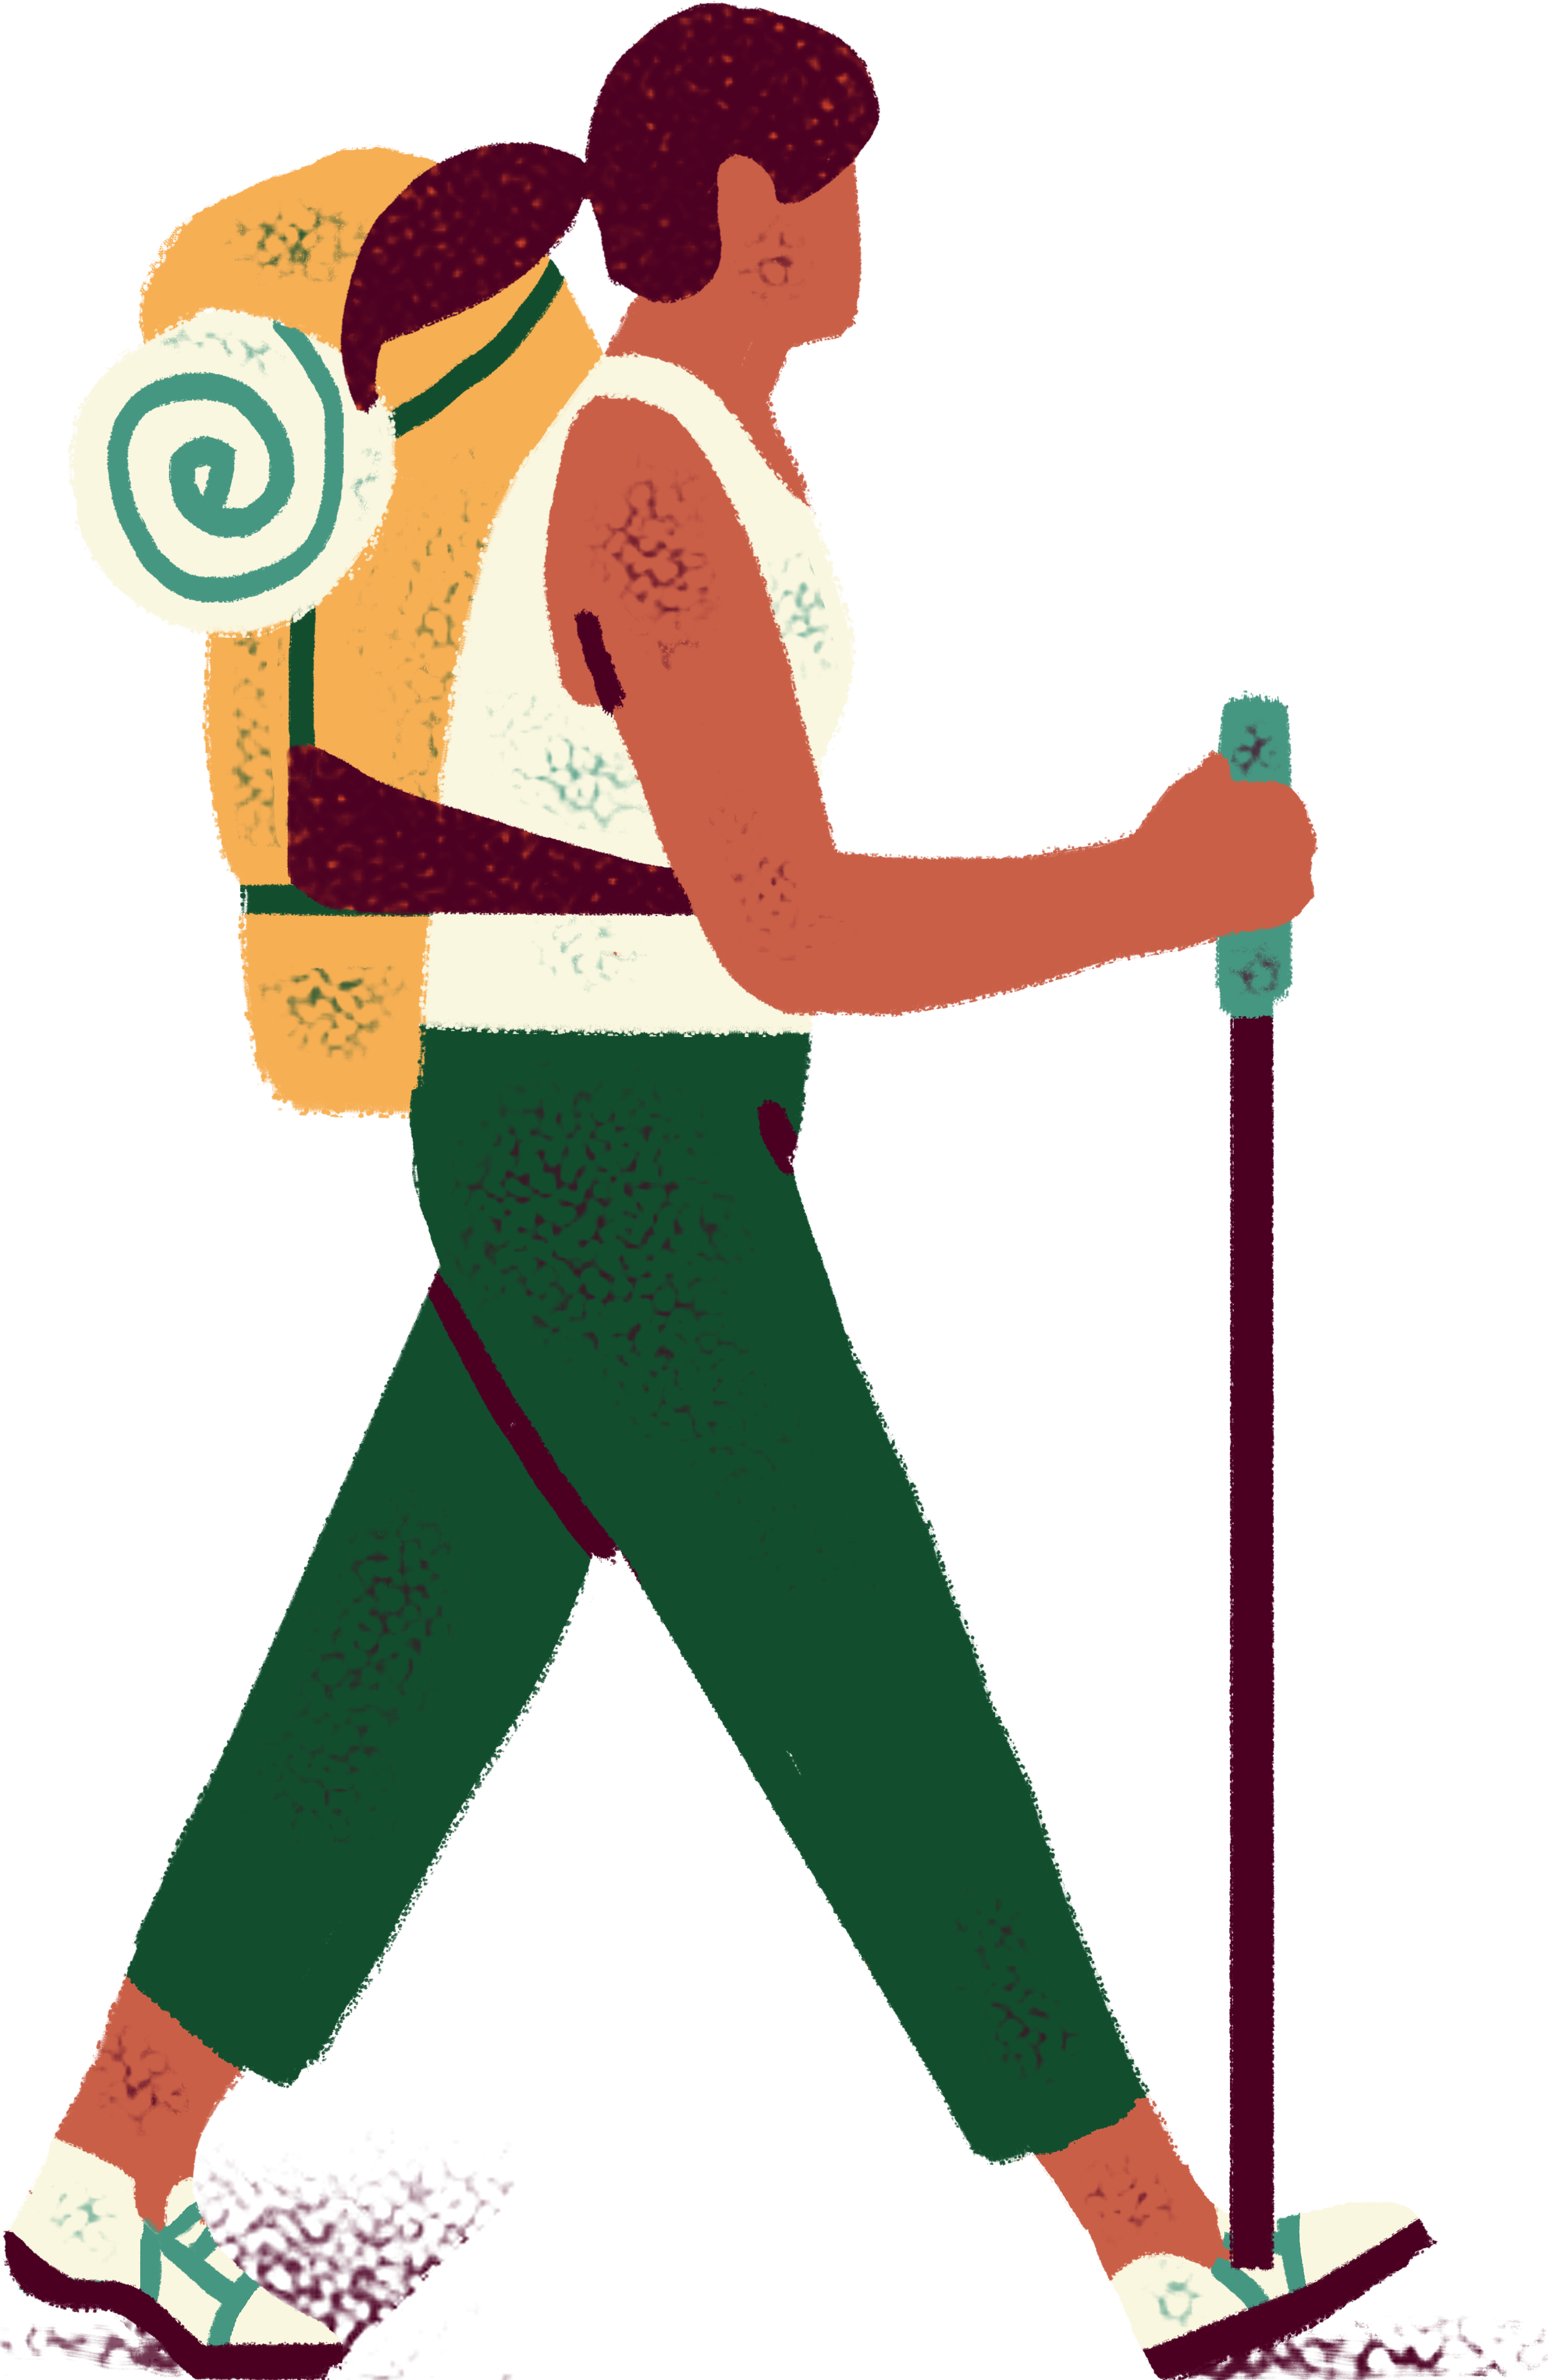 Illustration of a person hiking with a backpack.